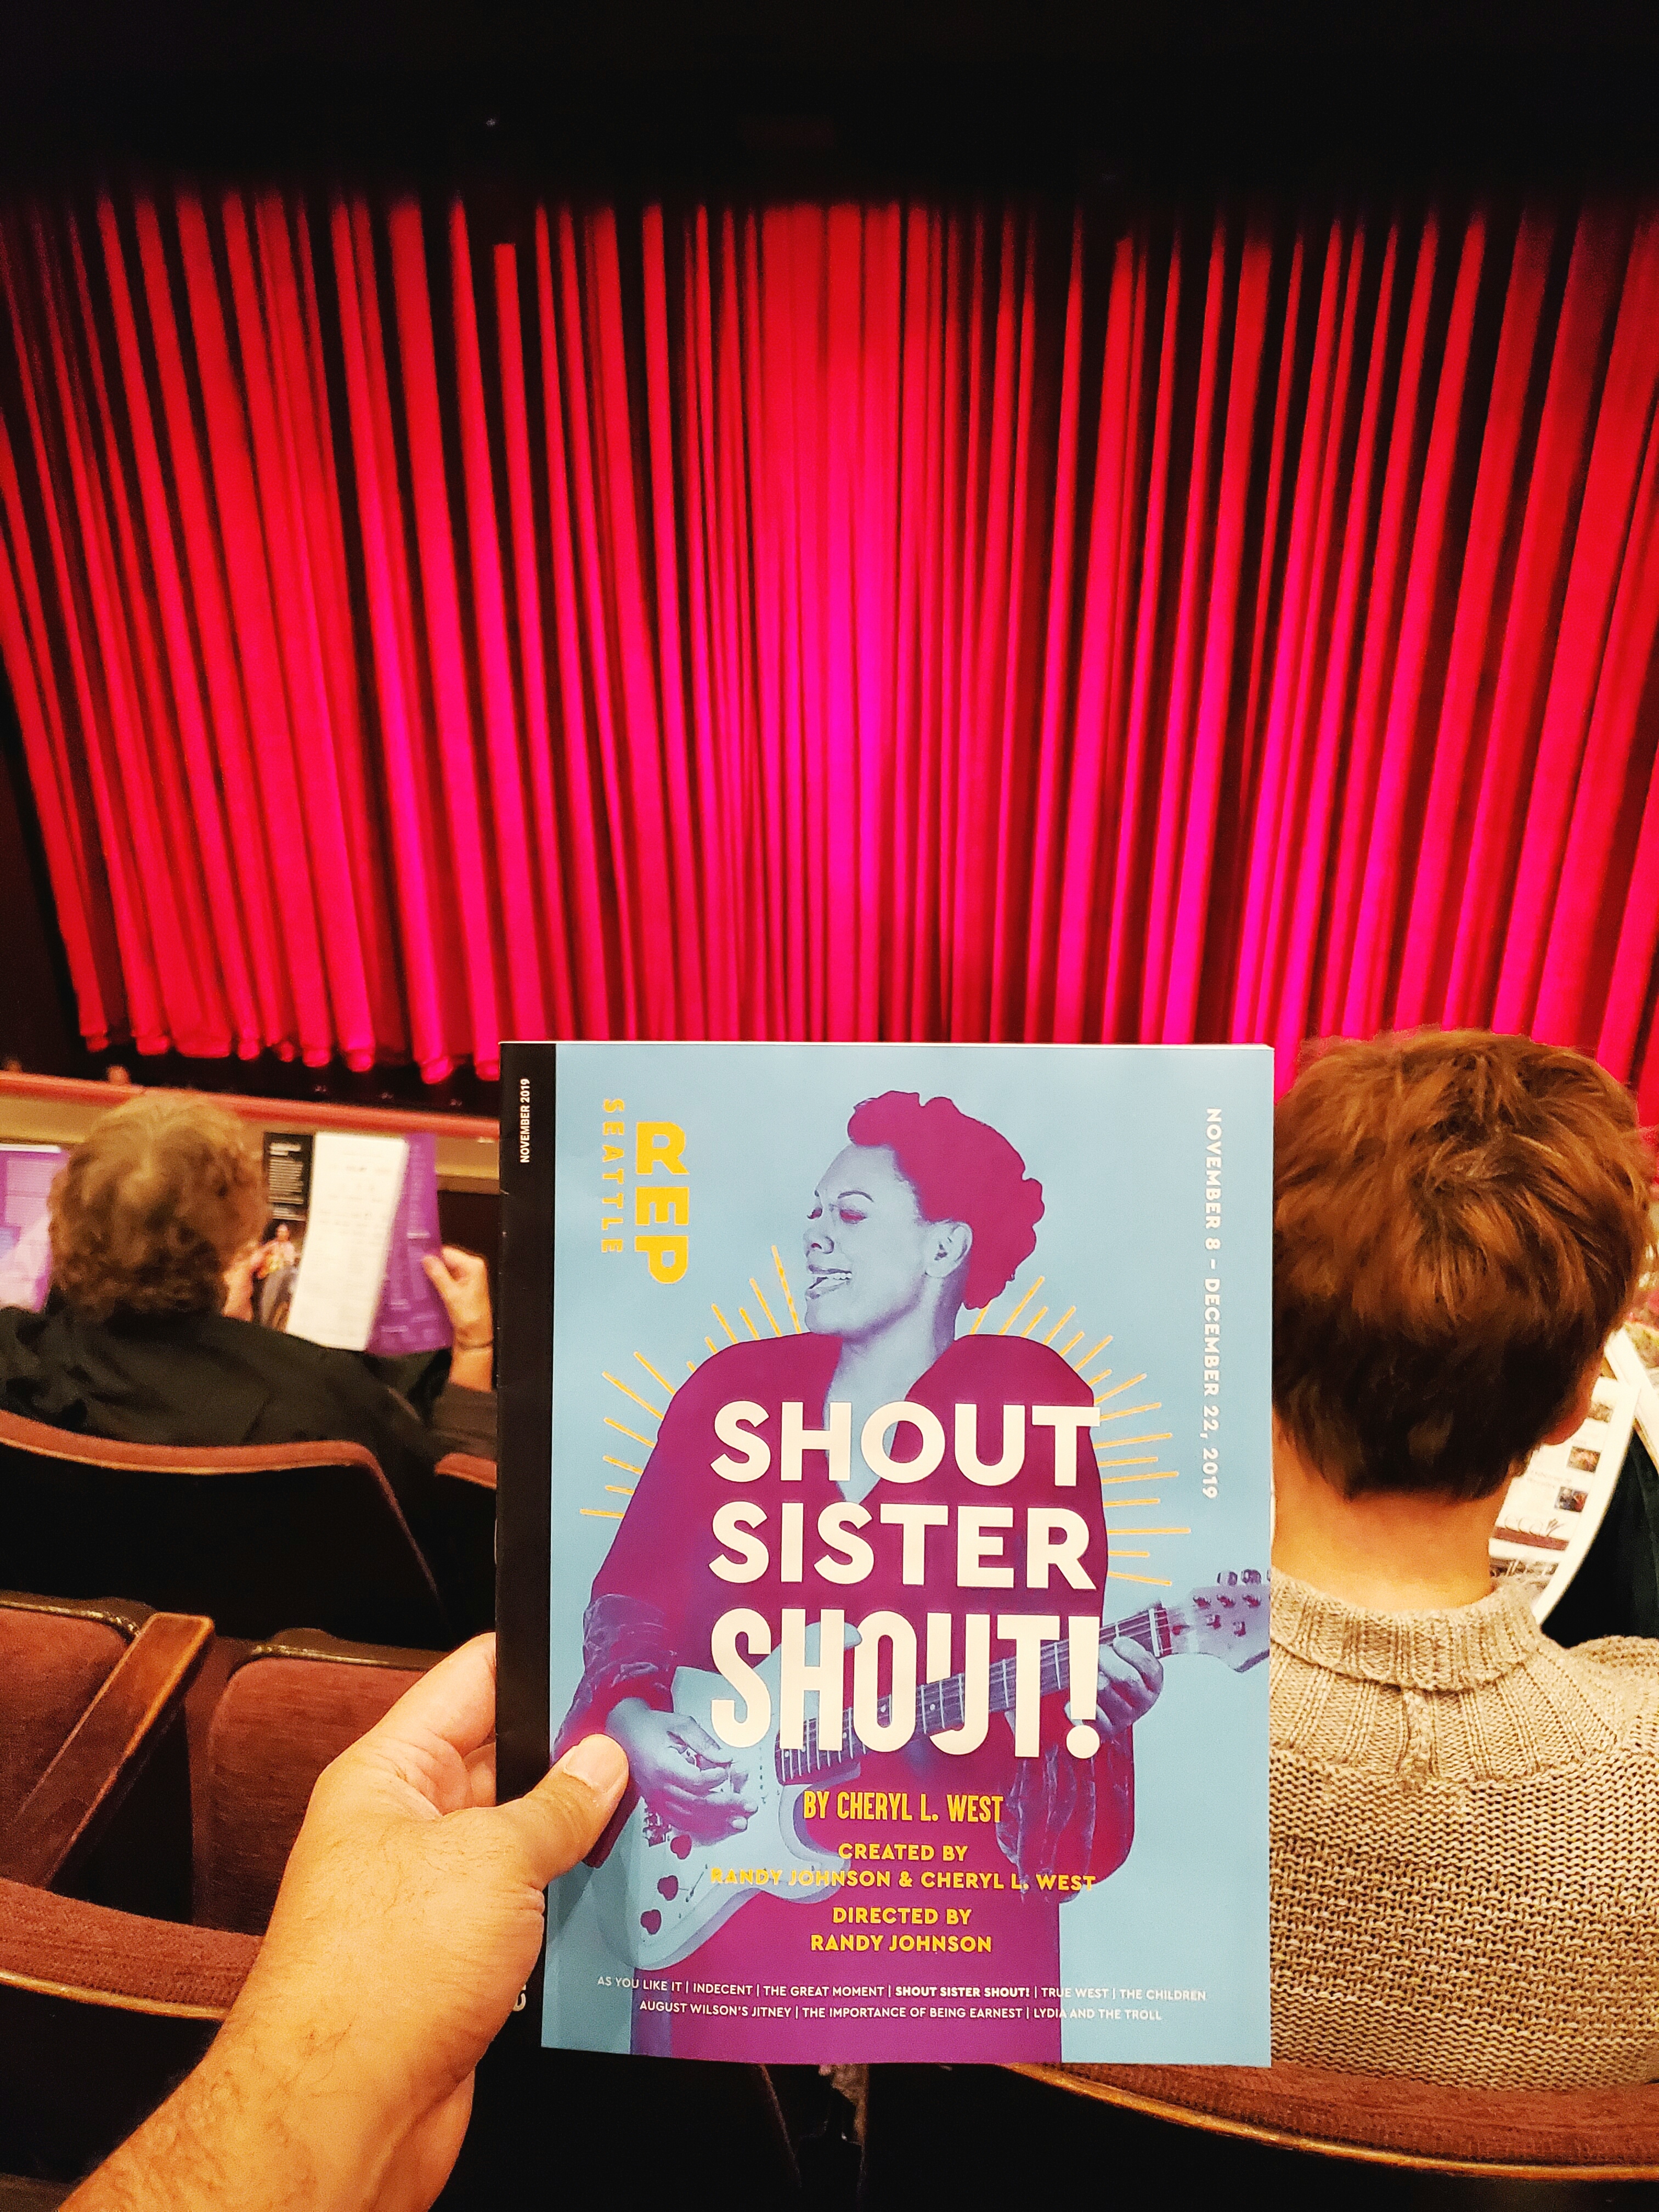 Shout Sister Shout #gospel #musical w/ Raymund at Seattle Rep. #Dynamite music & voices! Takes me back to my conservative Southern religious upbringing. It's unfortunate that church-inspired condemnation & guilt back then is still pervasive today.